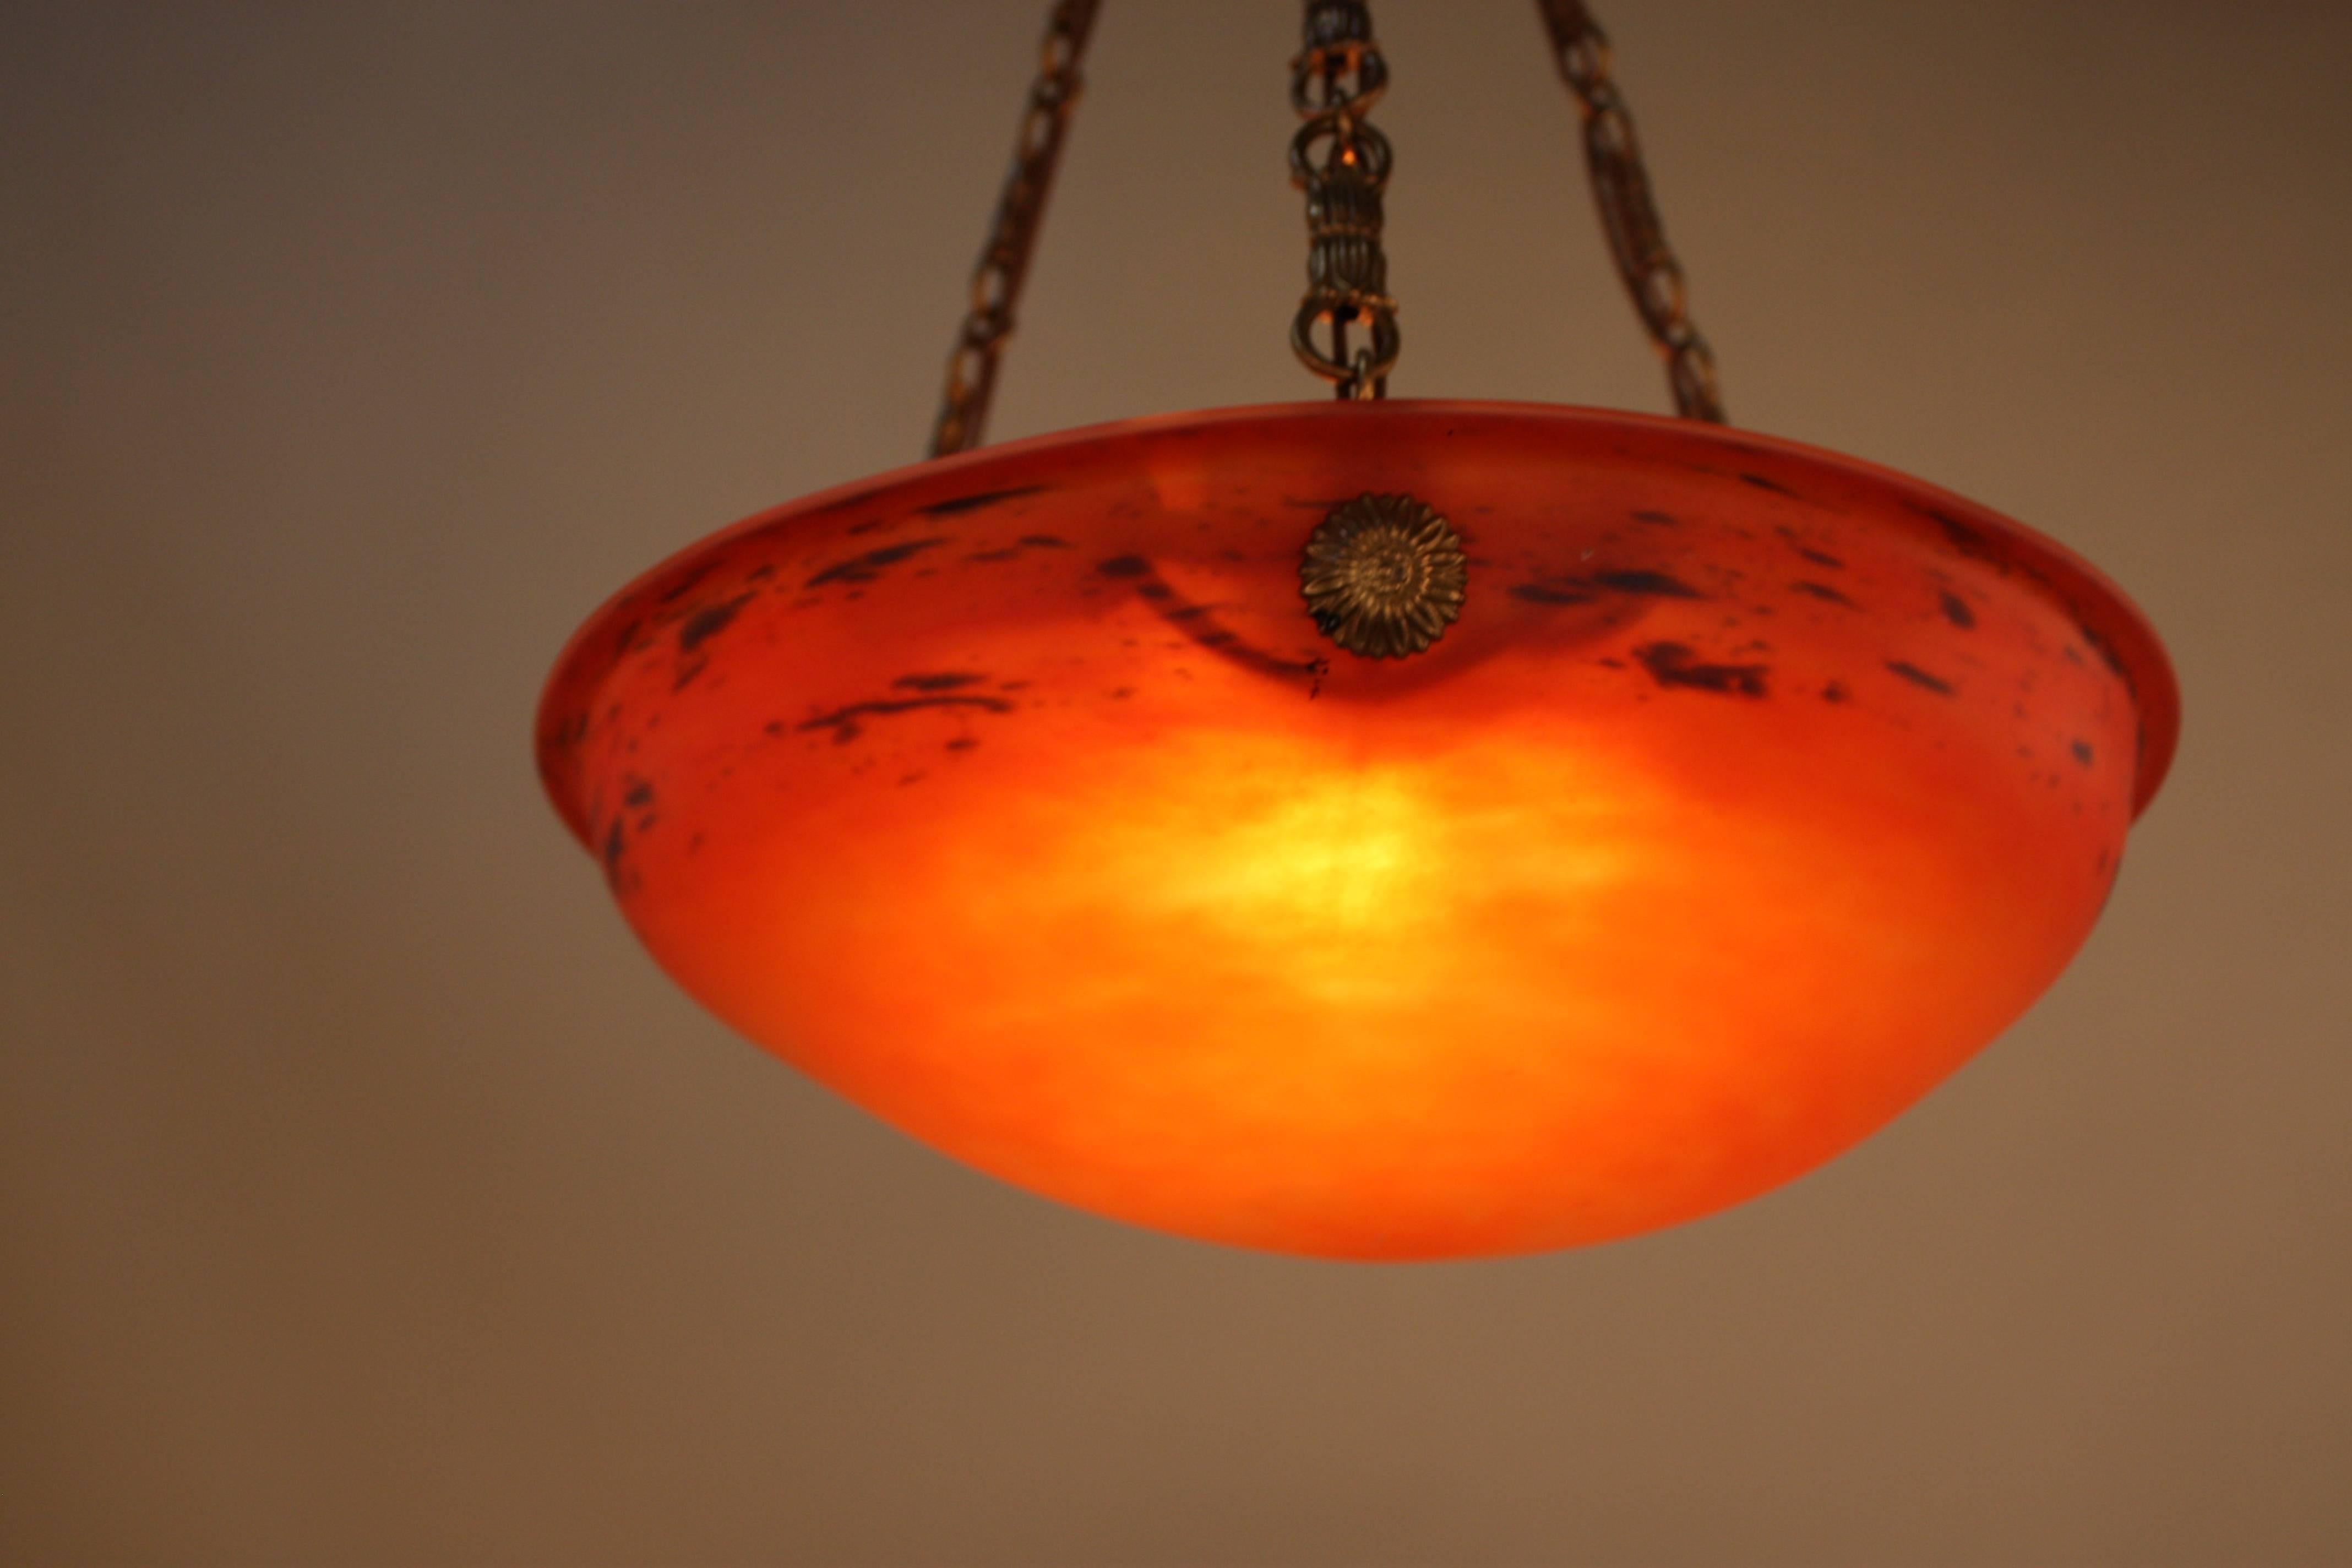 A French Art Deco glass nine-light ceiling pendant chandelier in Firey red/orange color. The shade is made by Schneider and suspended with bronze chain and canopy.